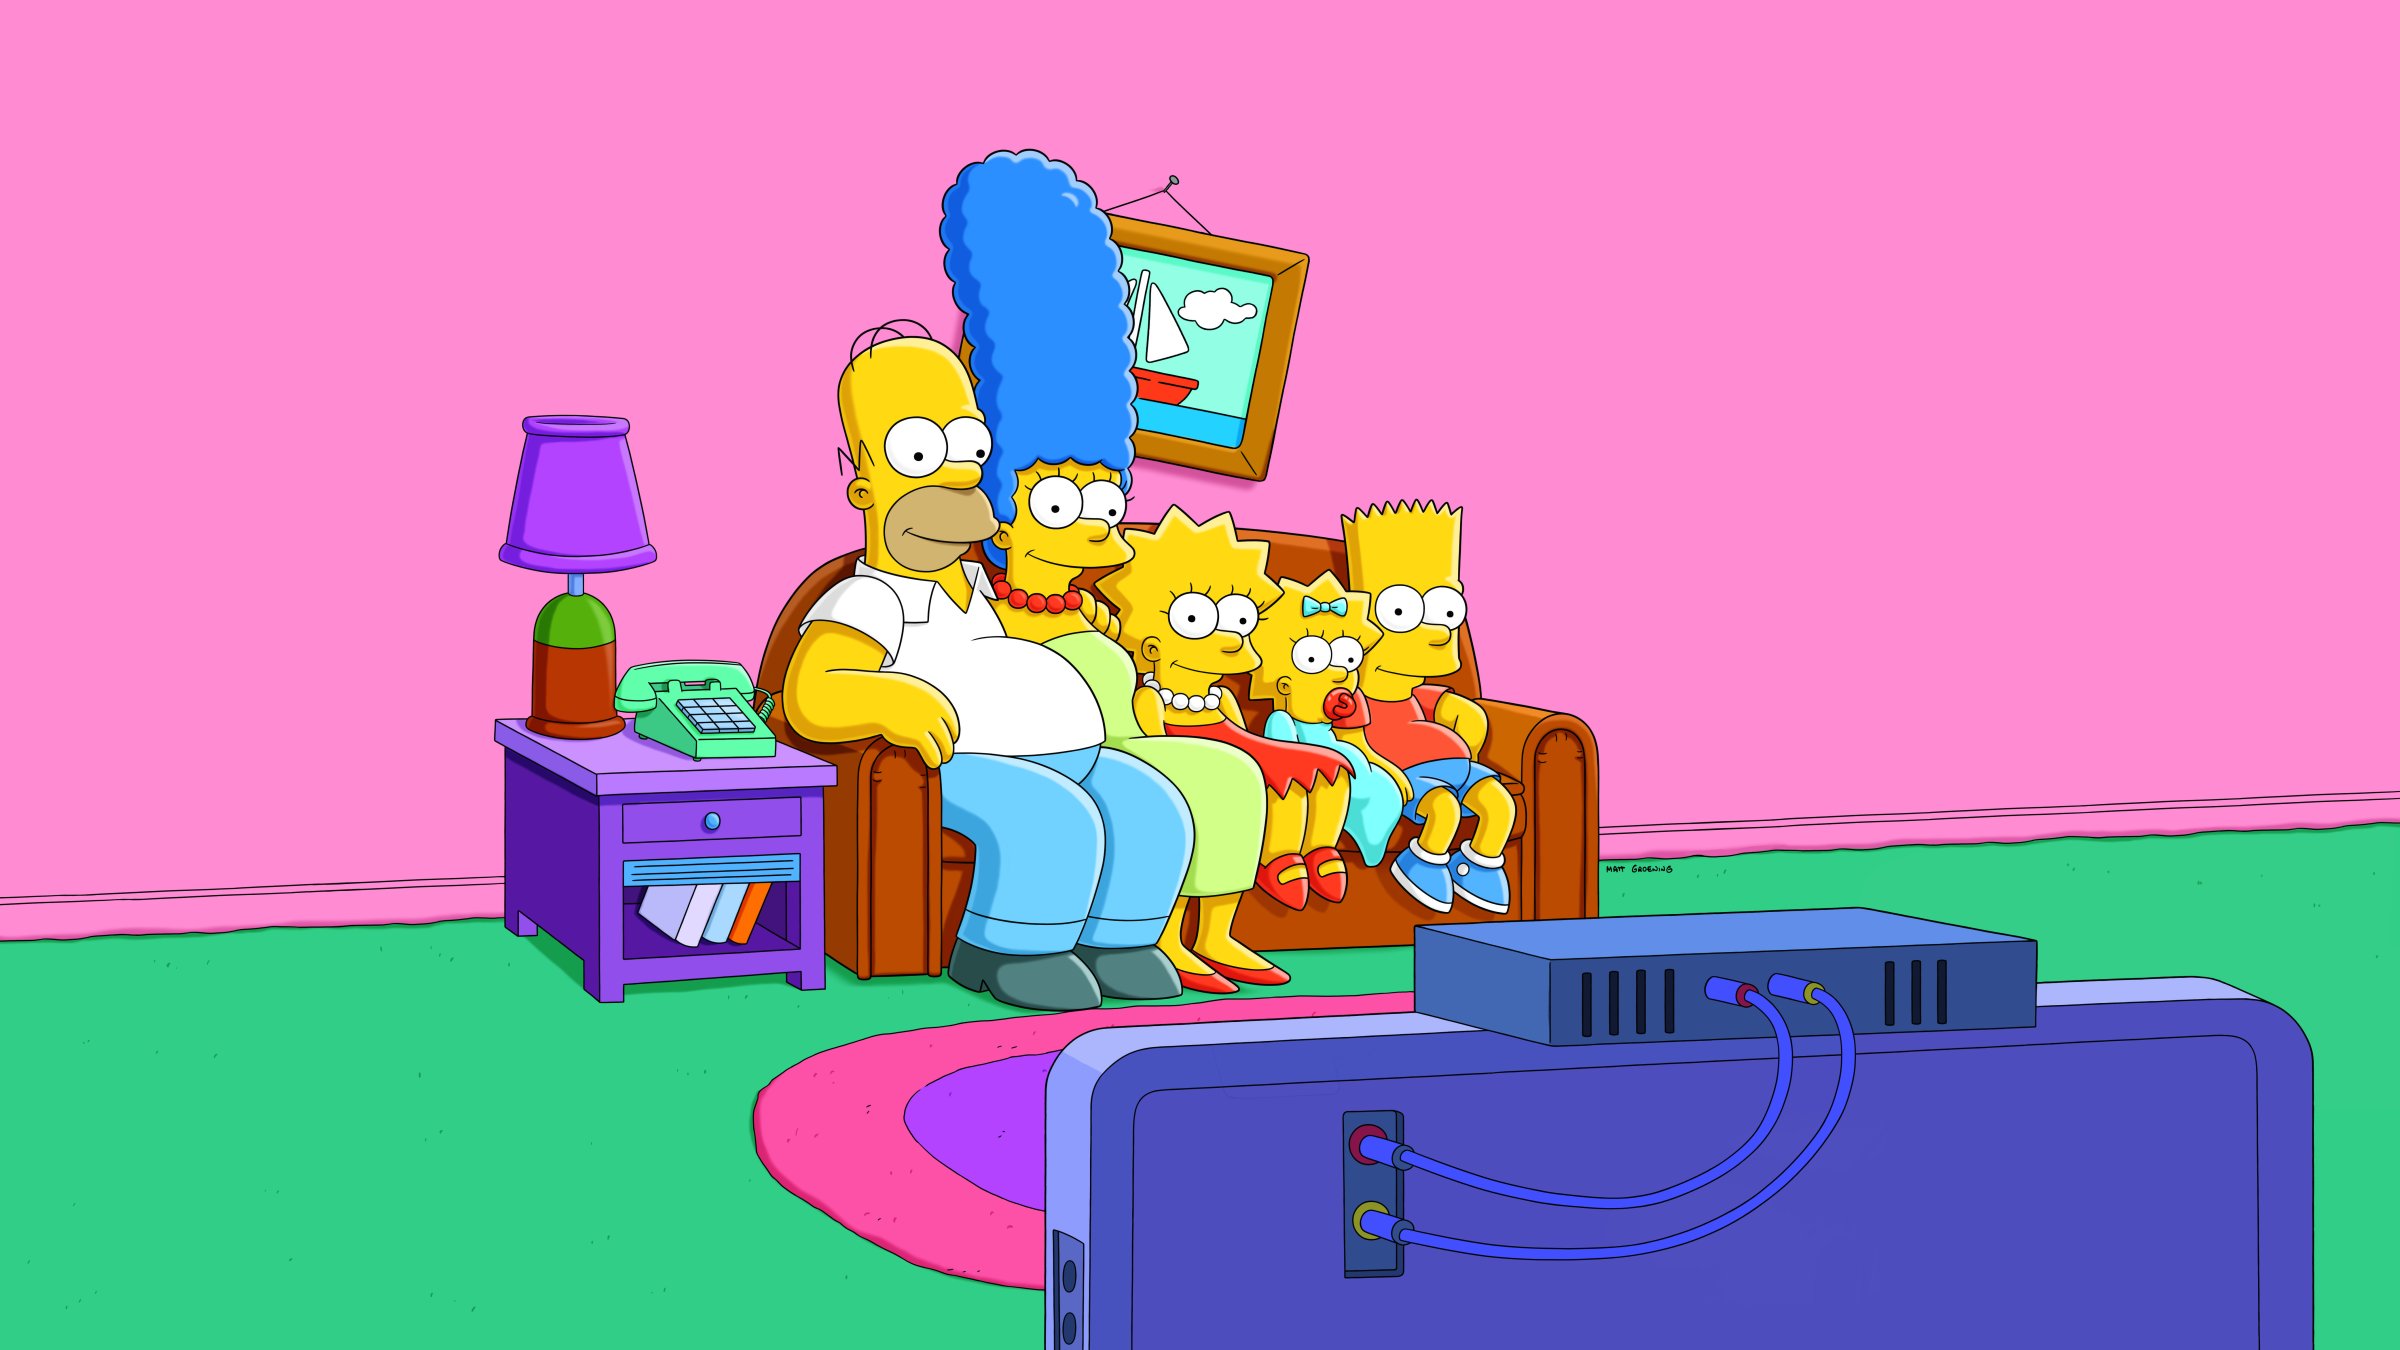 THE SIMPSONS: The Simpson Family. THE SIMPSONS ª and ©Ê2013 TCFFC ALL RIGHTS RESERVED.